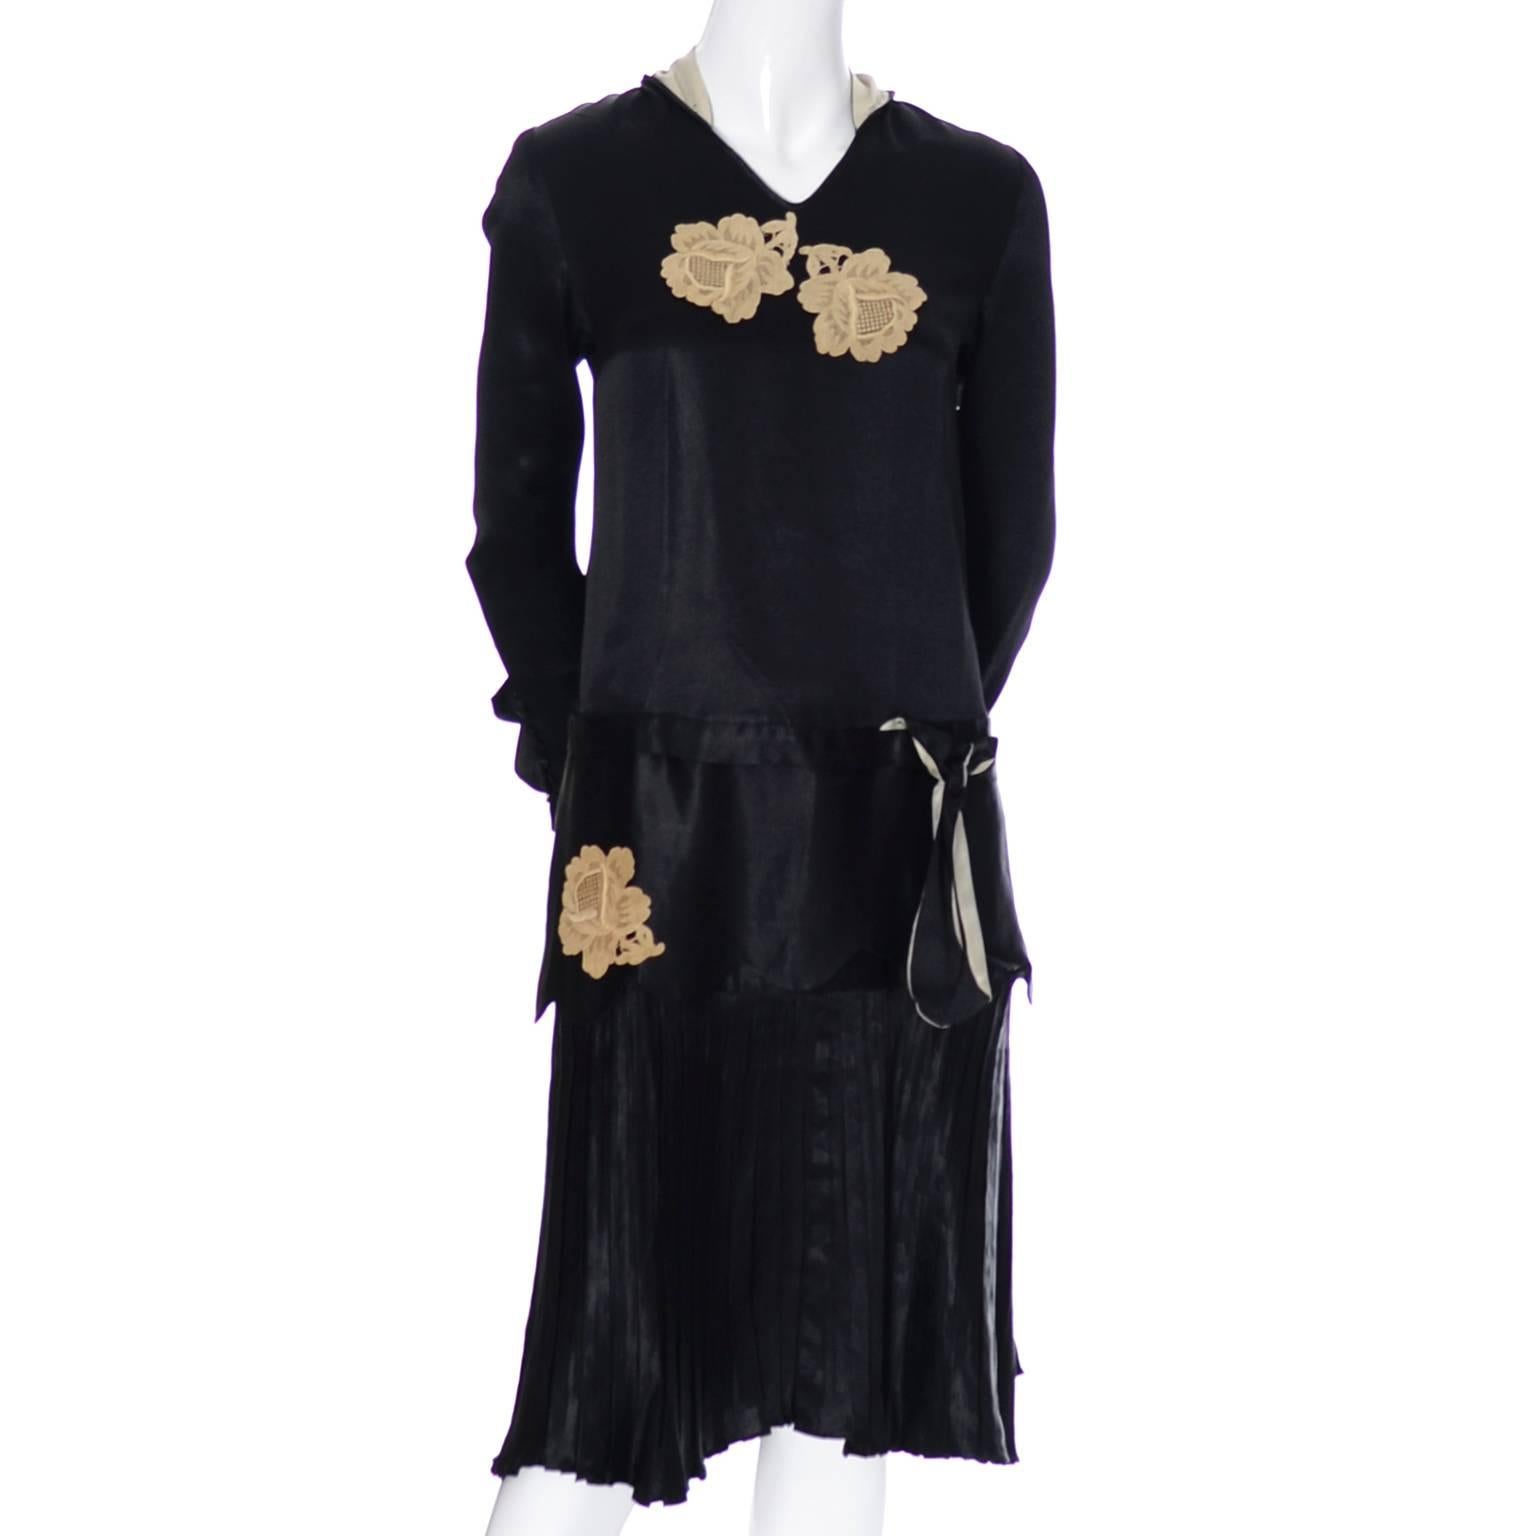 This lovely vintage black silk 1920's dress has a pretty collar that has panels that drape down the back, a pleated drop waist skirt and rose lace applique.  The ruffled cuffs are so beautiful and the cuffs, collar and panels are lined in ivory